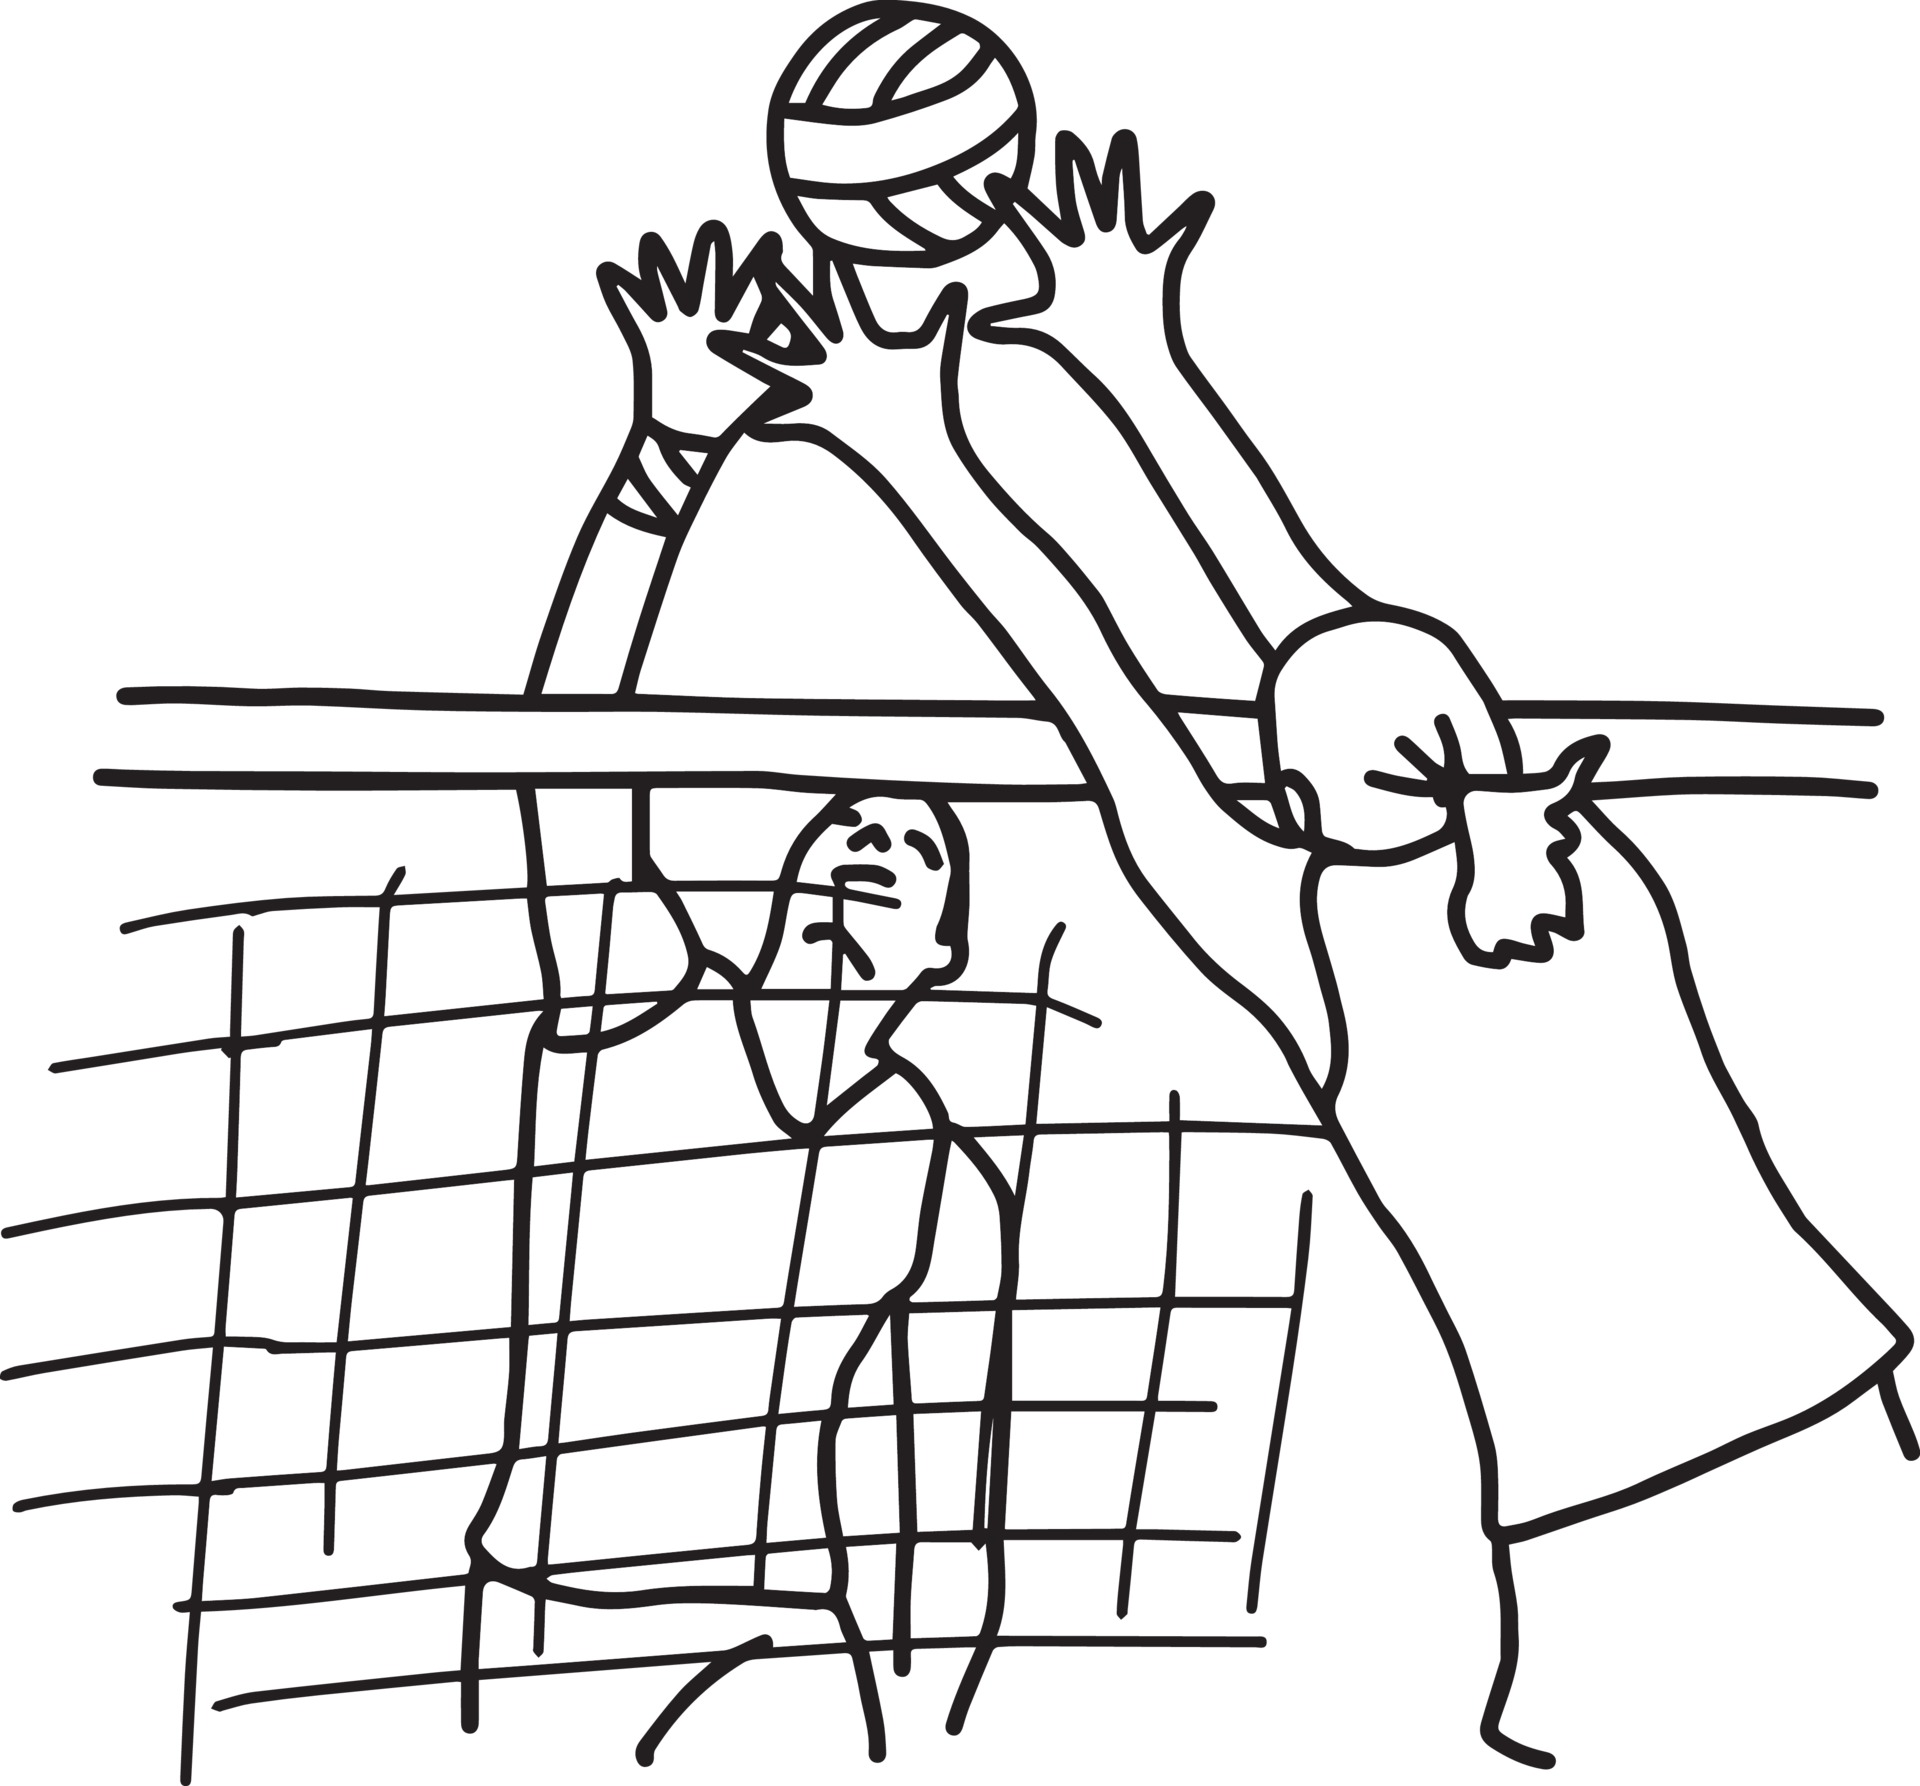 Volleyball Player Illustration Sketch Hand Drawn Vector 